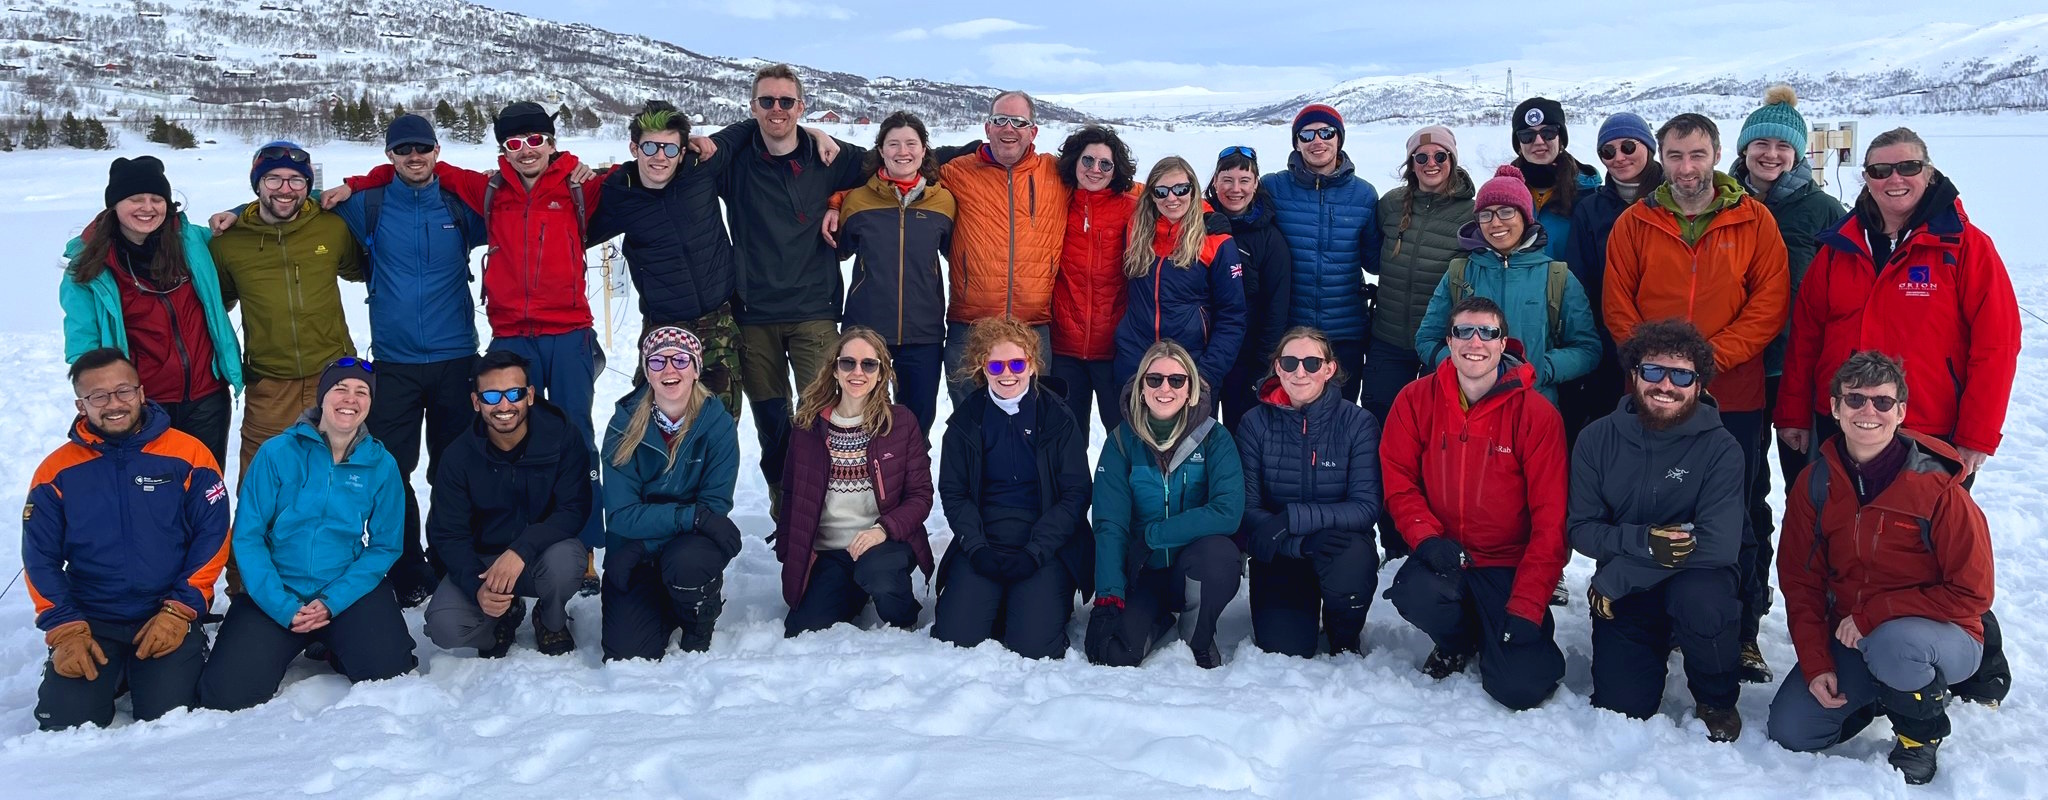 The attendees and instructors of the CryoSkills course, 2024 stand as a group in front of a snowy background.